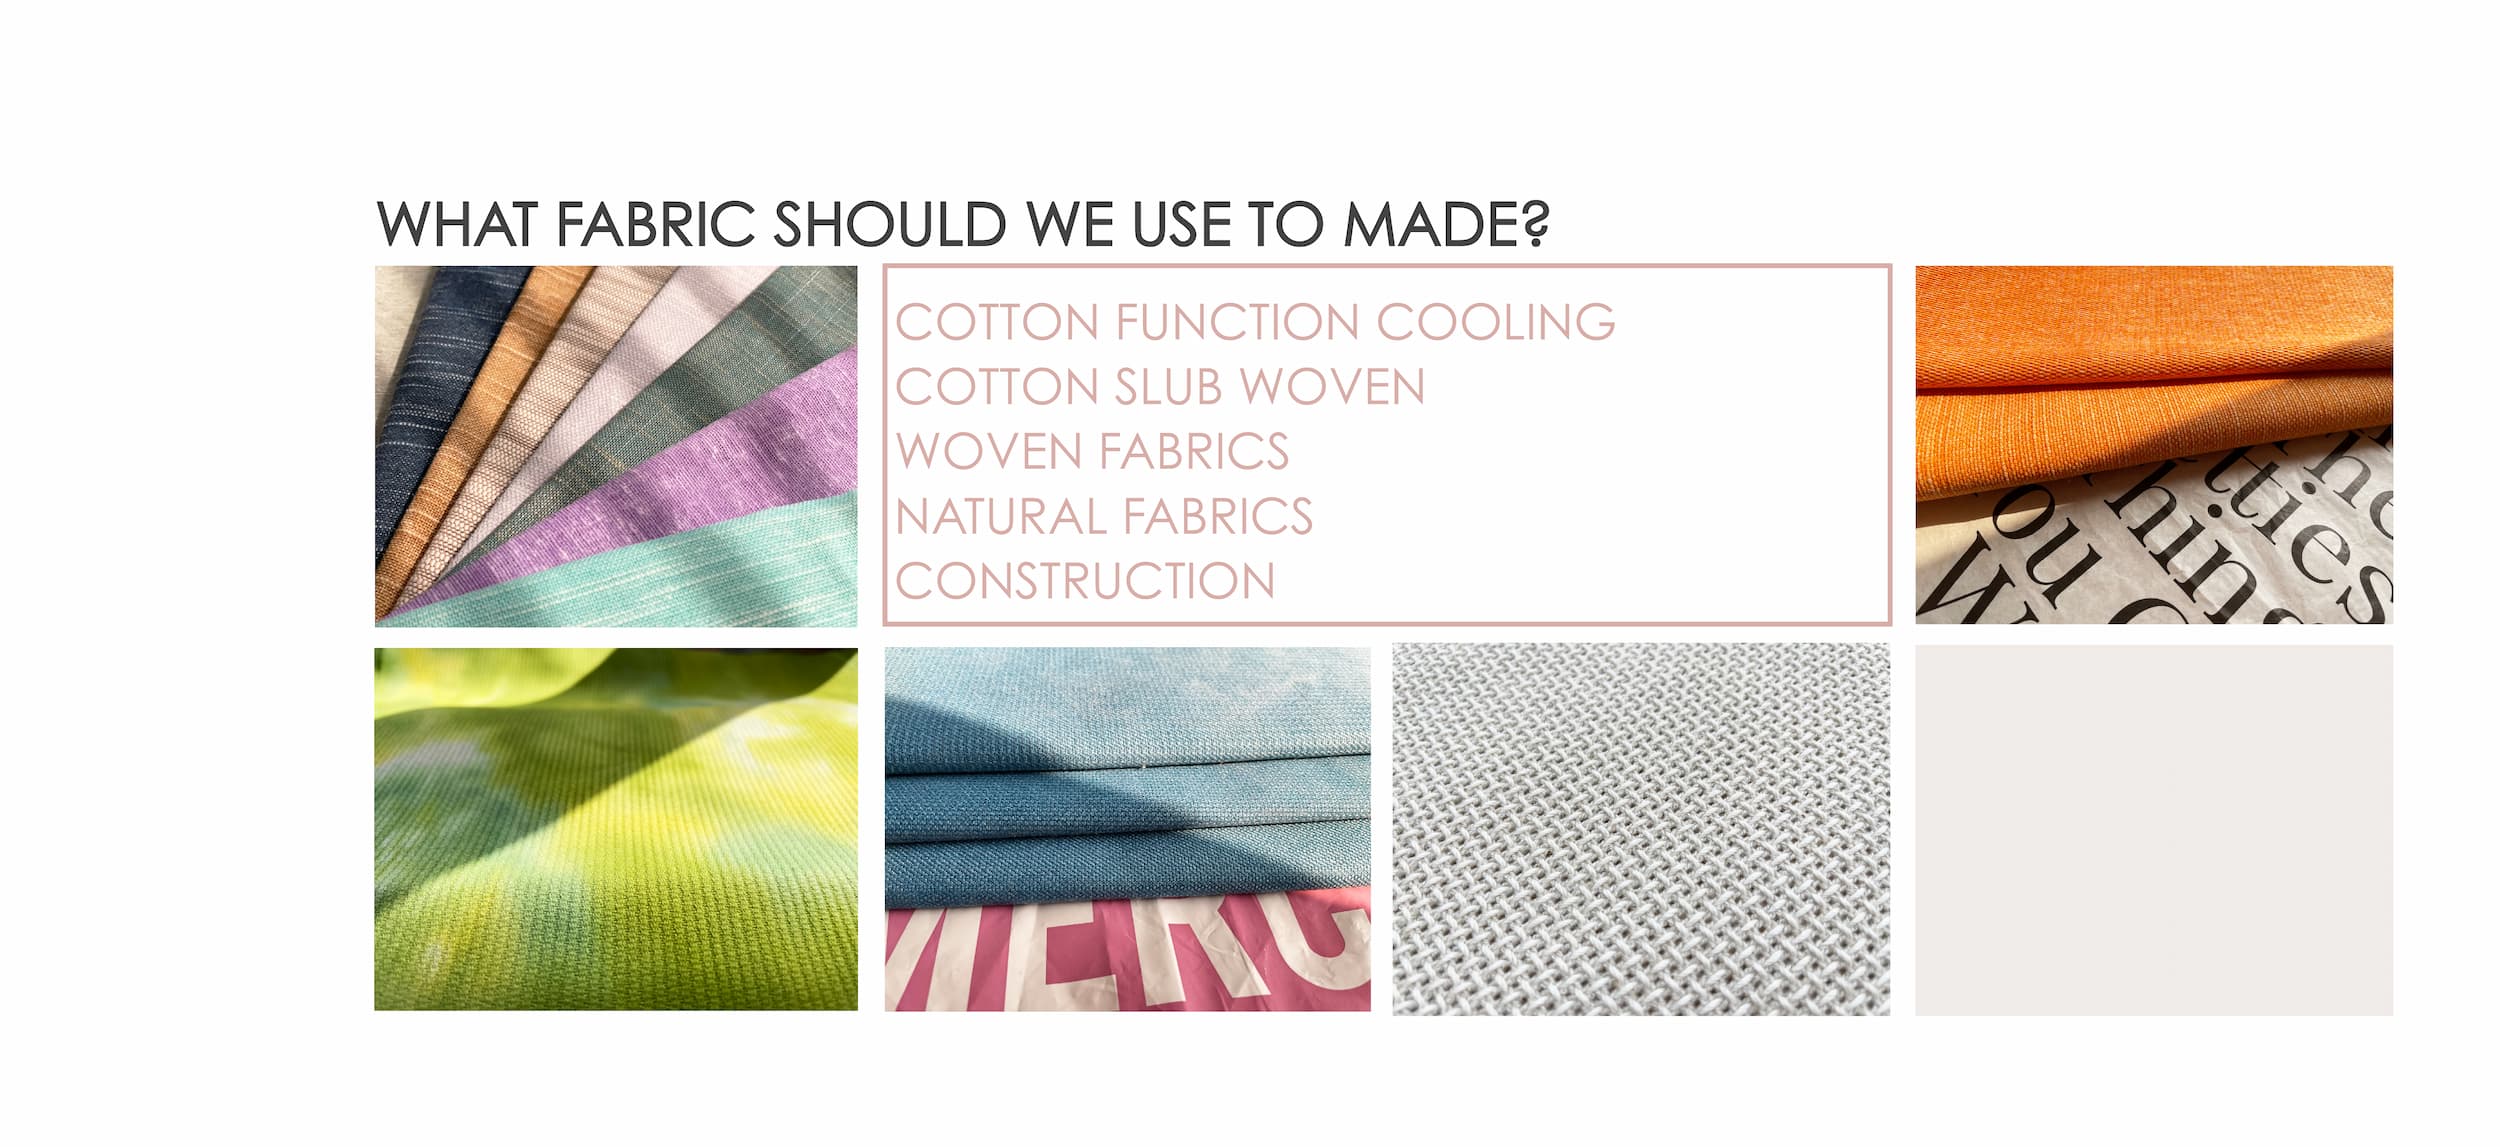 WHAT FABRIC SHOULD WE USE TO MADE?